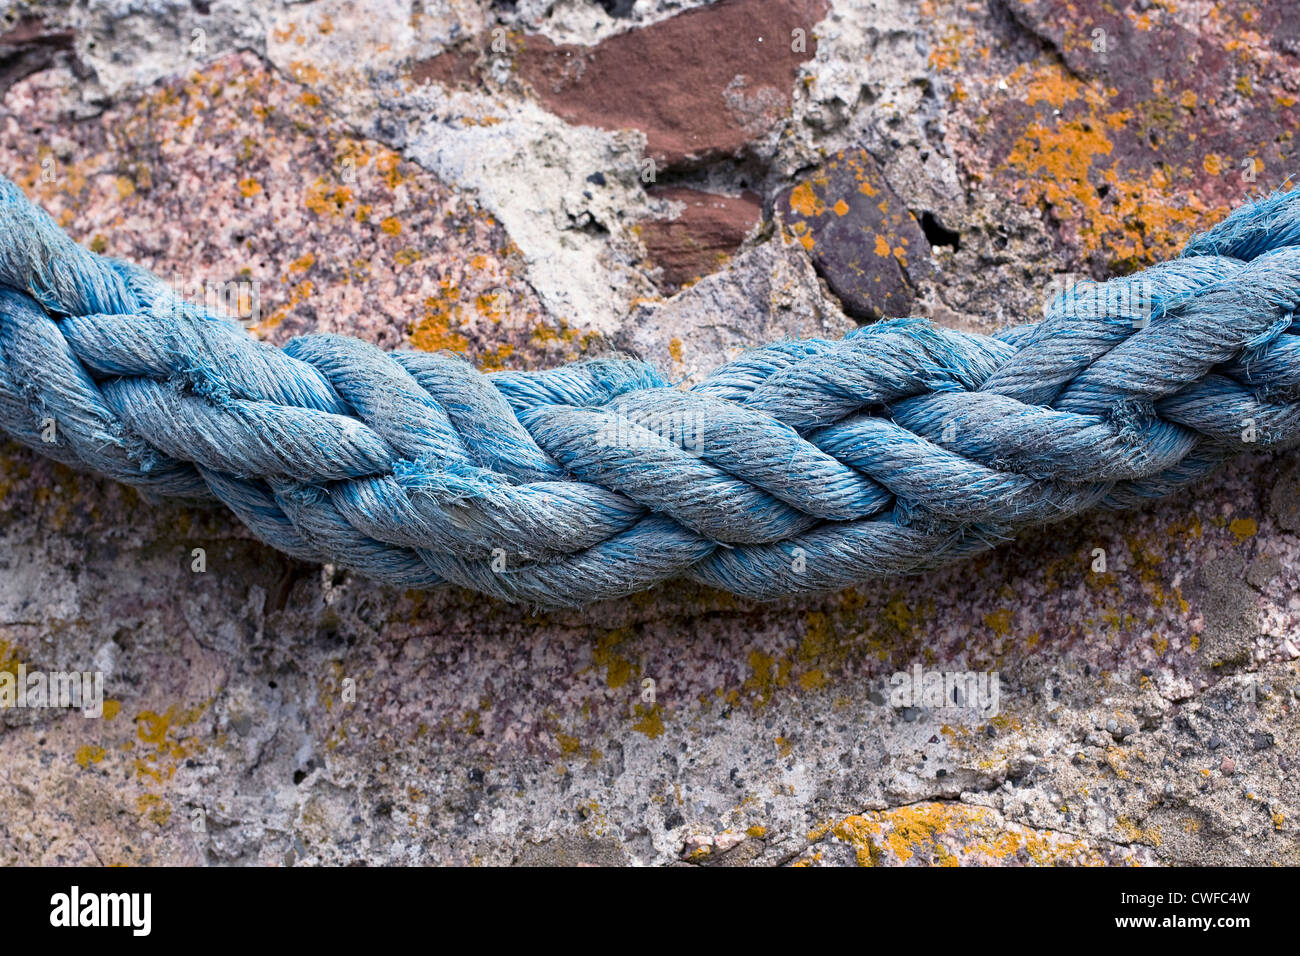 Heavy Duty Ancient Rope For Stones Moving. Stock Photo, Picture and Royalty  Free Image. Image 51611288.